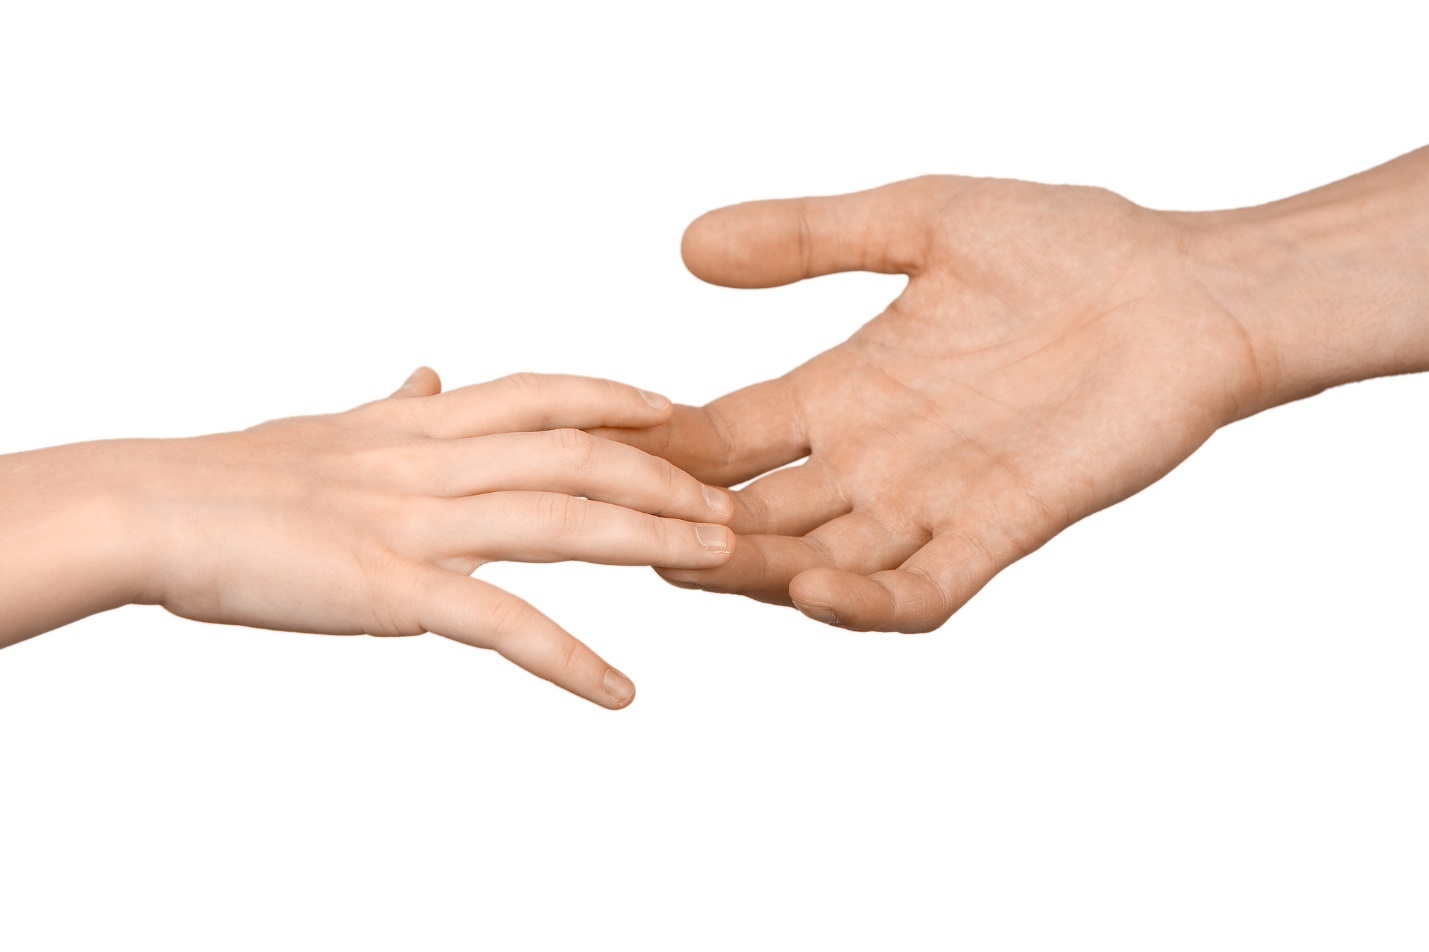 A pair of hands shaking

Description automatically generated with low confidence